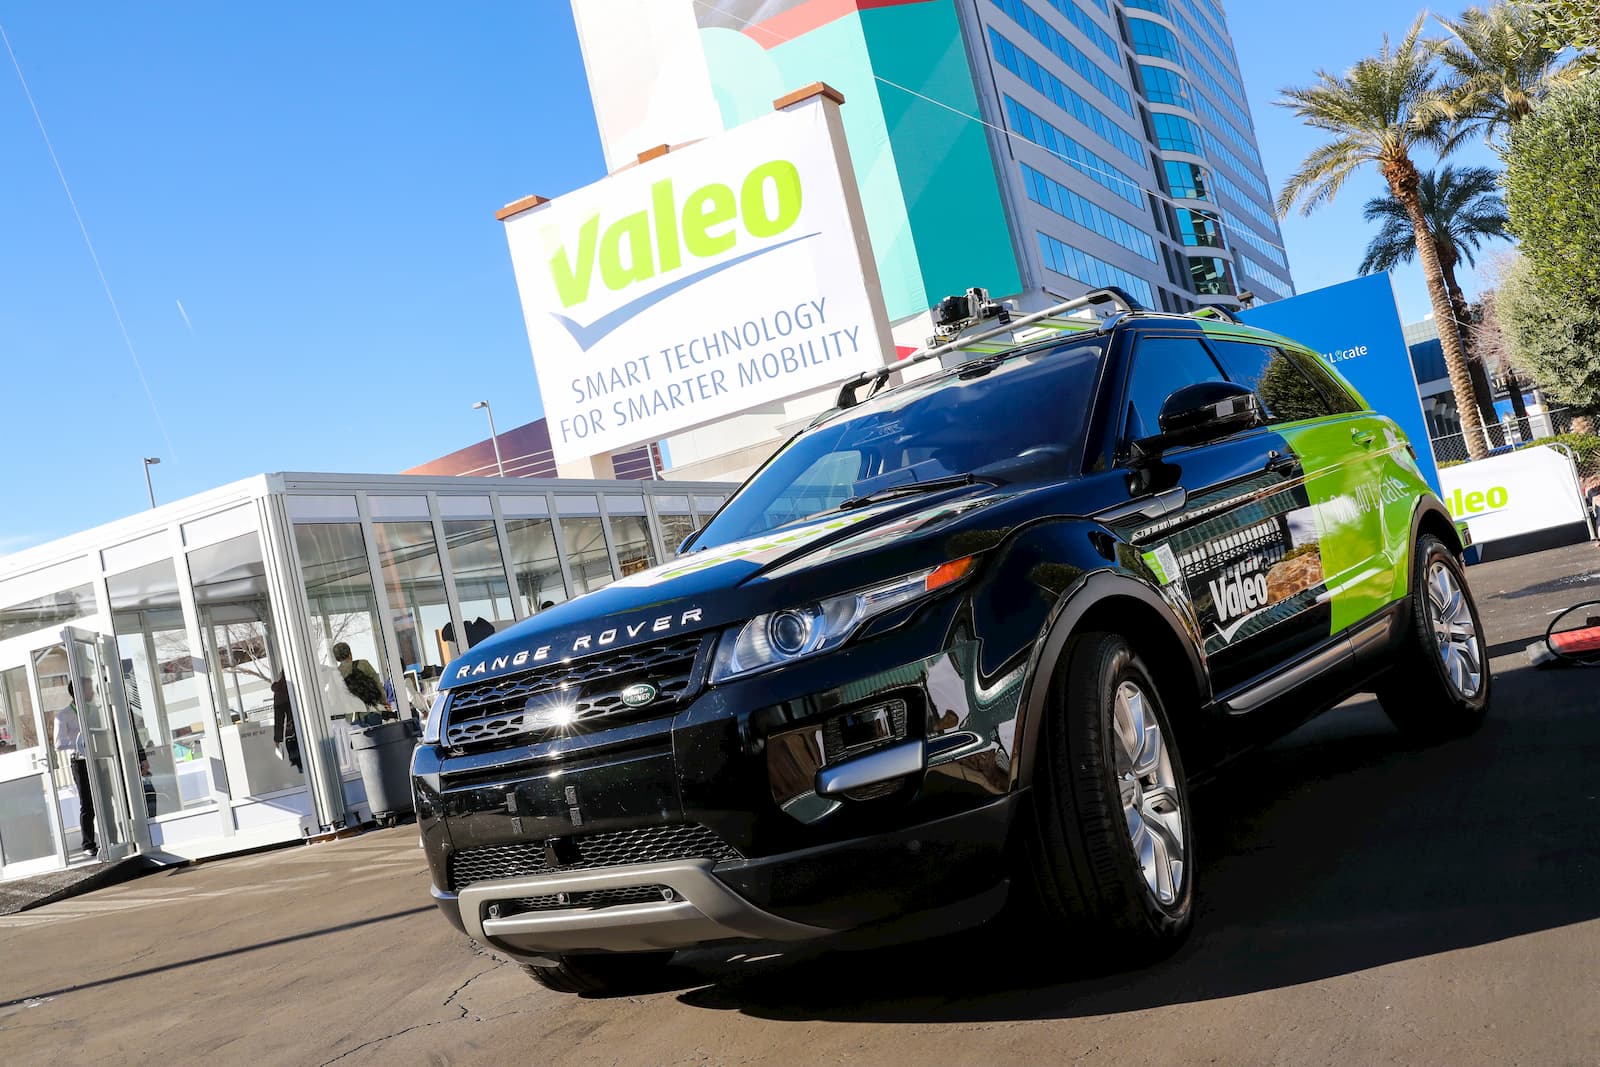 Valeo car in front of Valeo stand at CES 2020